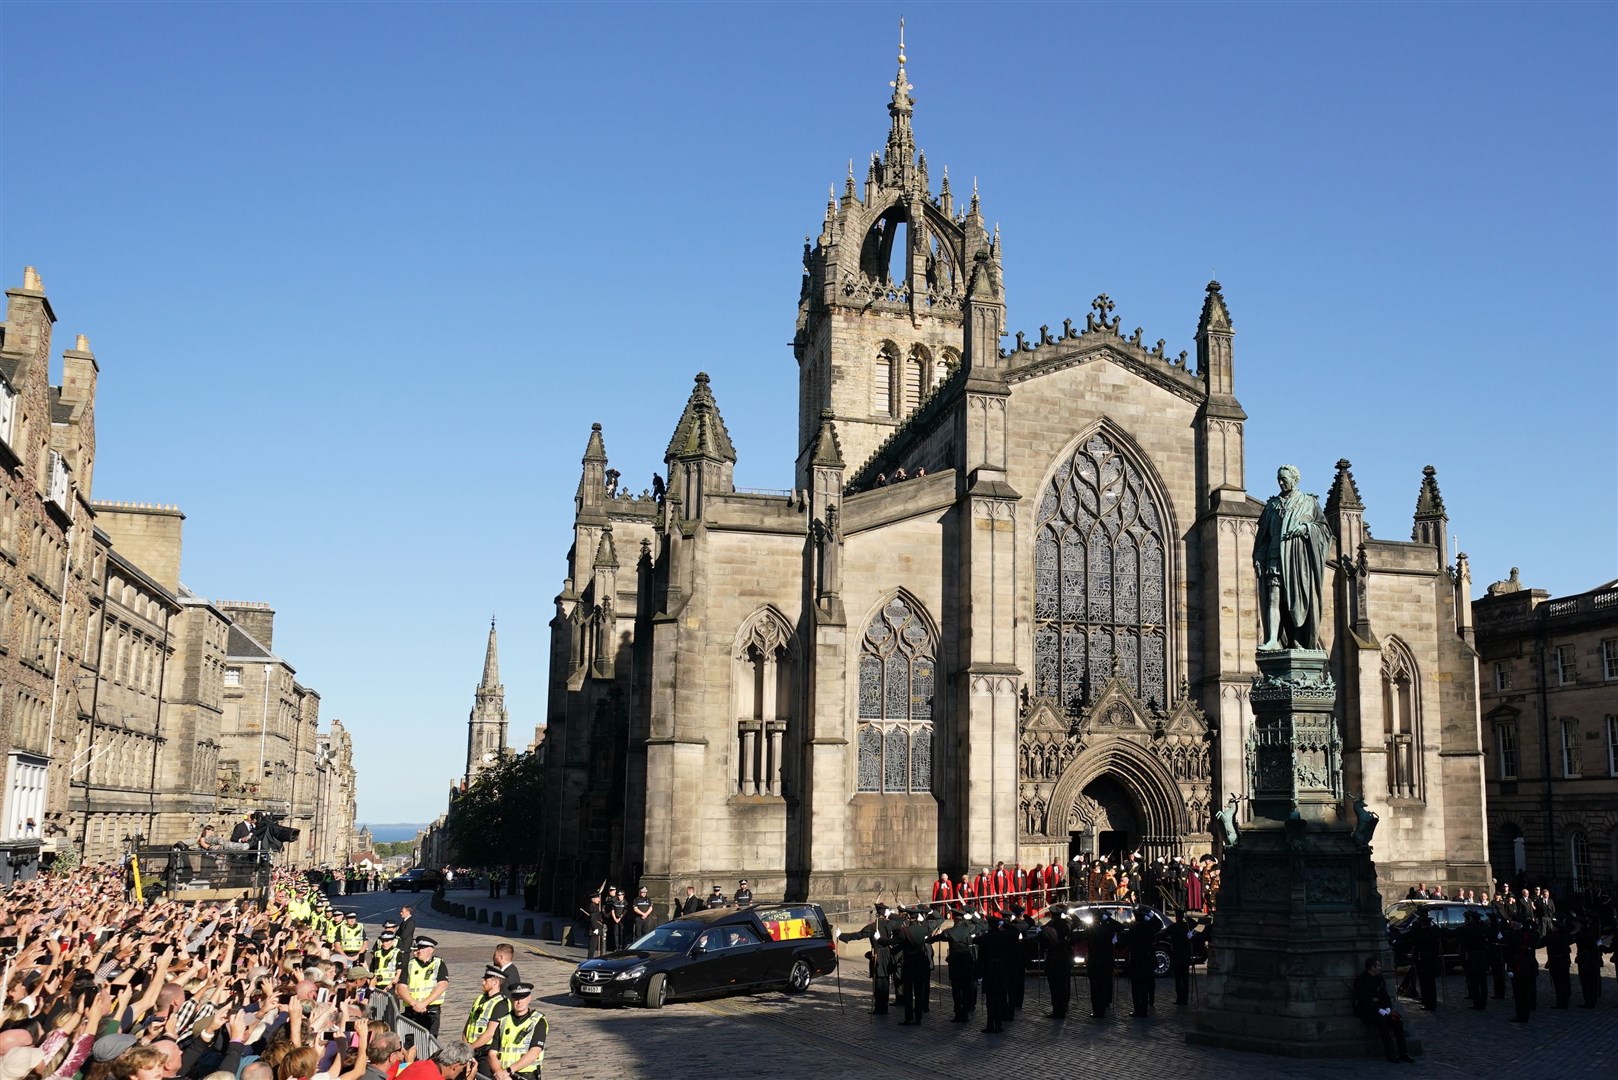 St Giles’ Cathedral (Jacob King/PA)